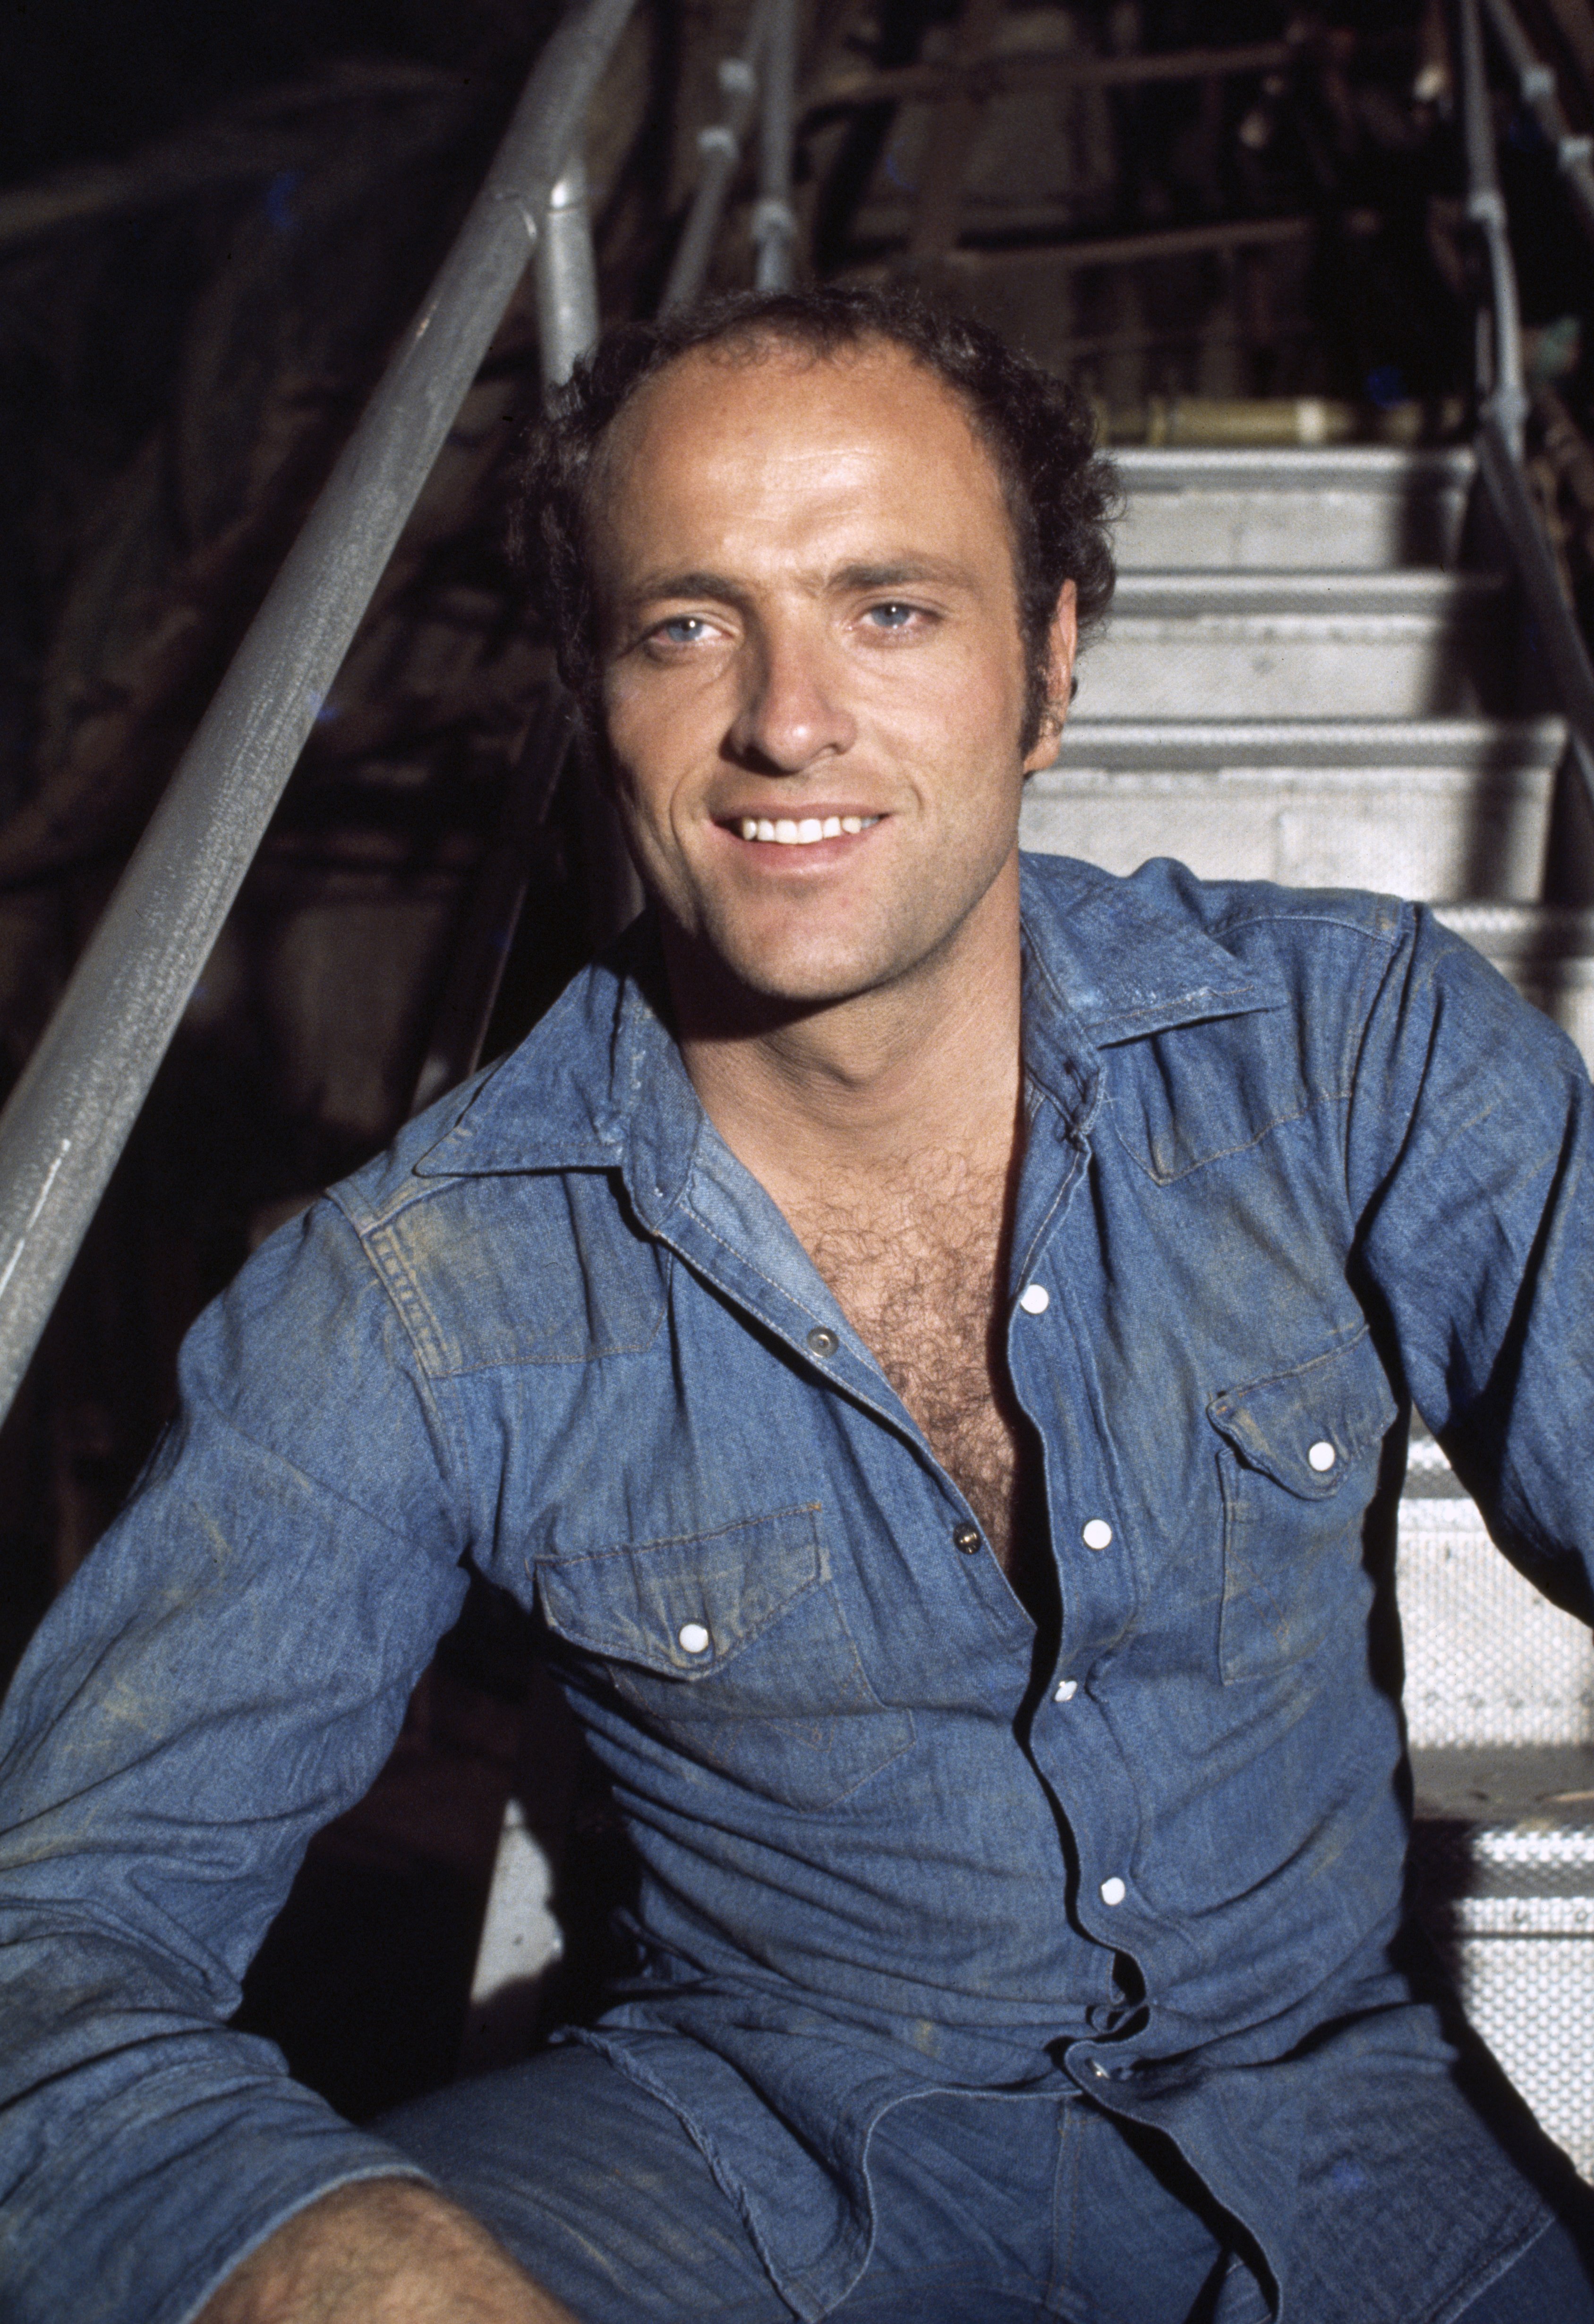 Kevin Dobson on a pilot episode of "Stranded" in May 26, 1976. | Source: Getty Images.